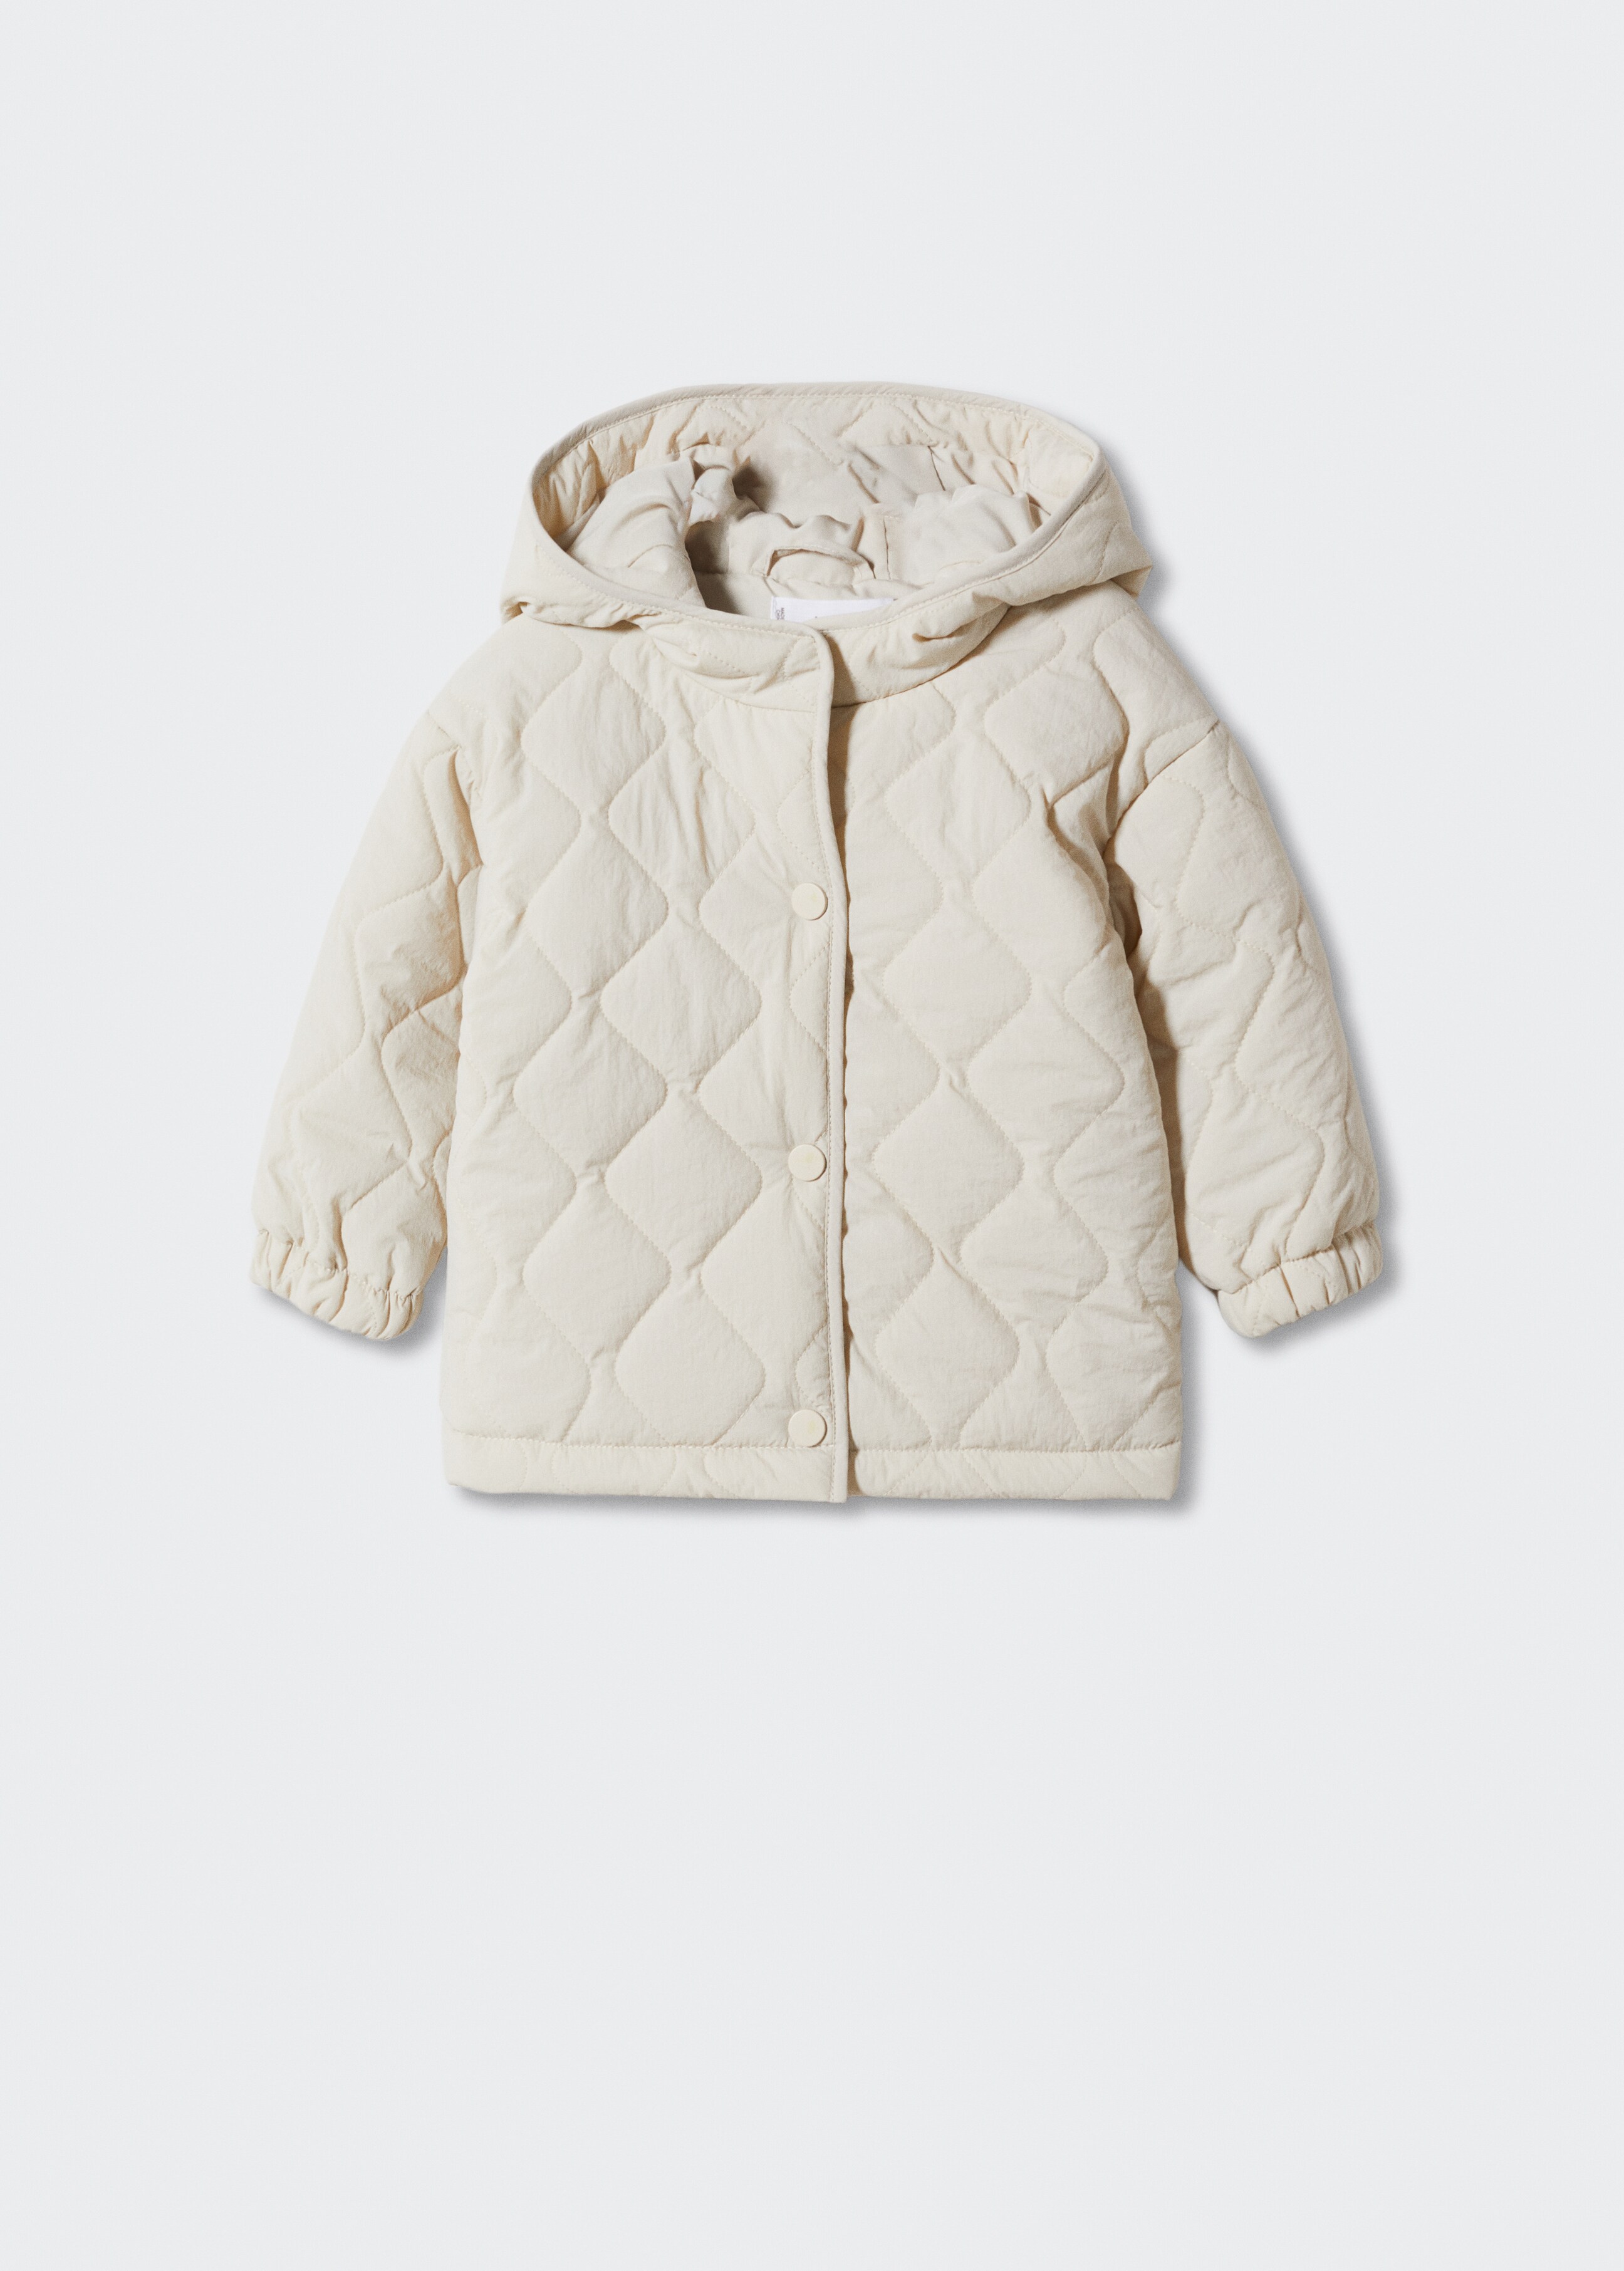 Rhombus quilted jacket - Article without model